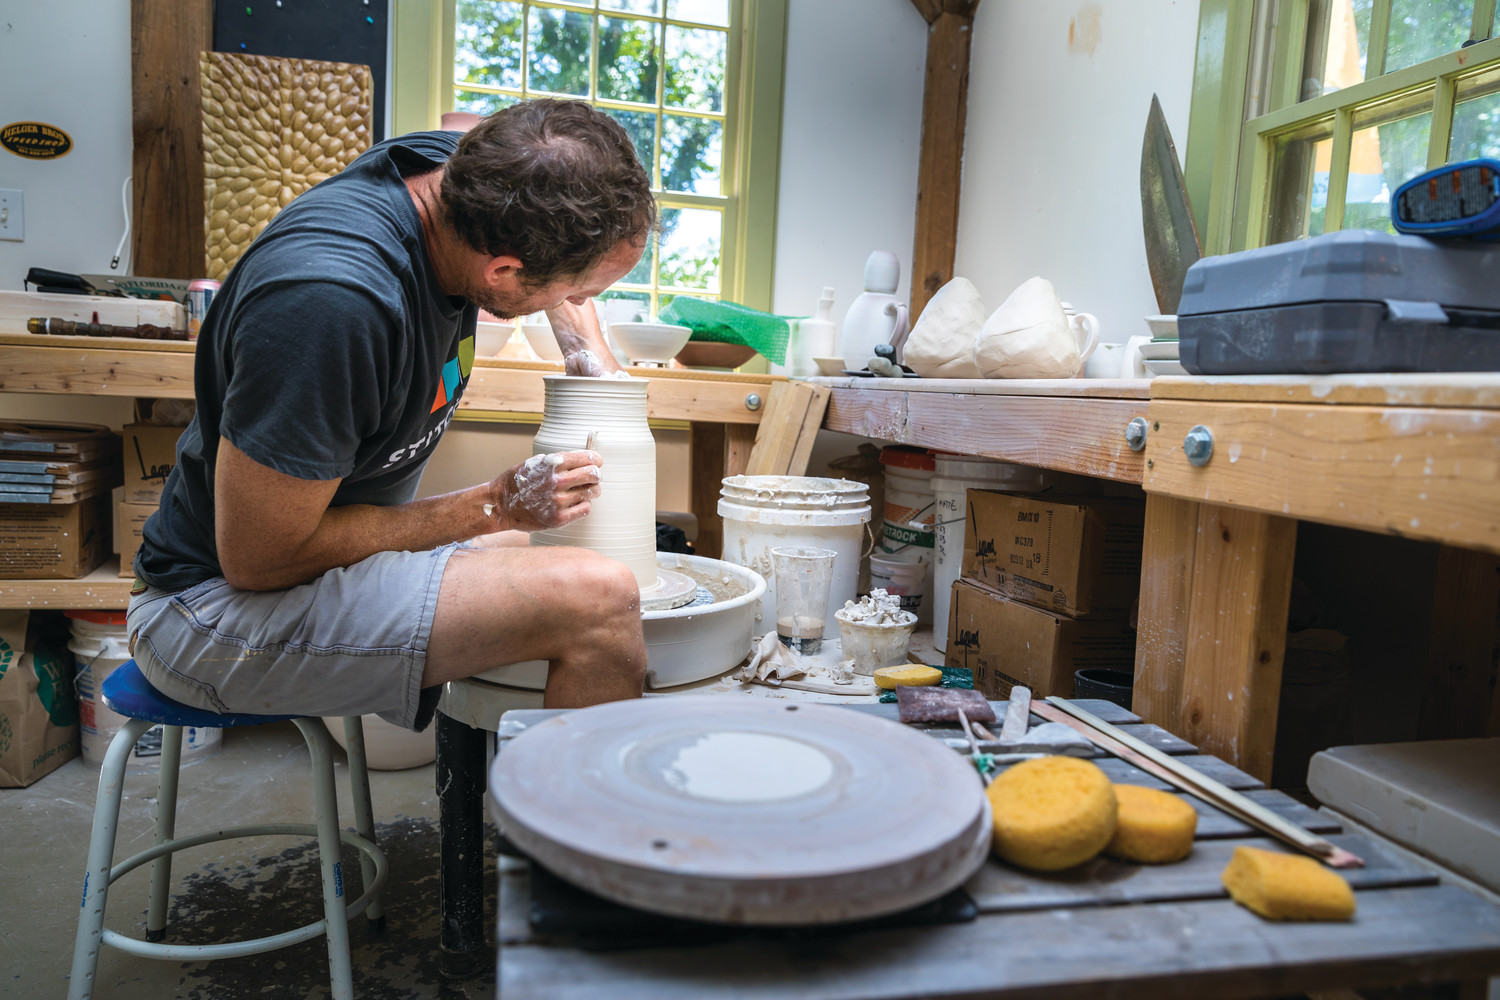 Charlie Barmonde of Arch Contemporary Ceramics creates his prolific works of pottery in his Tiverton studio.